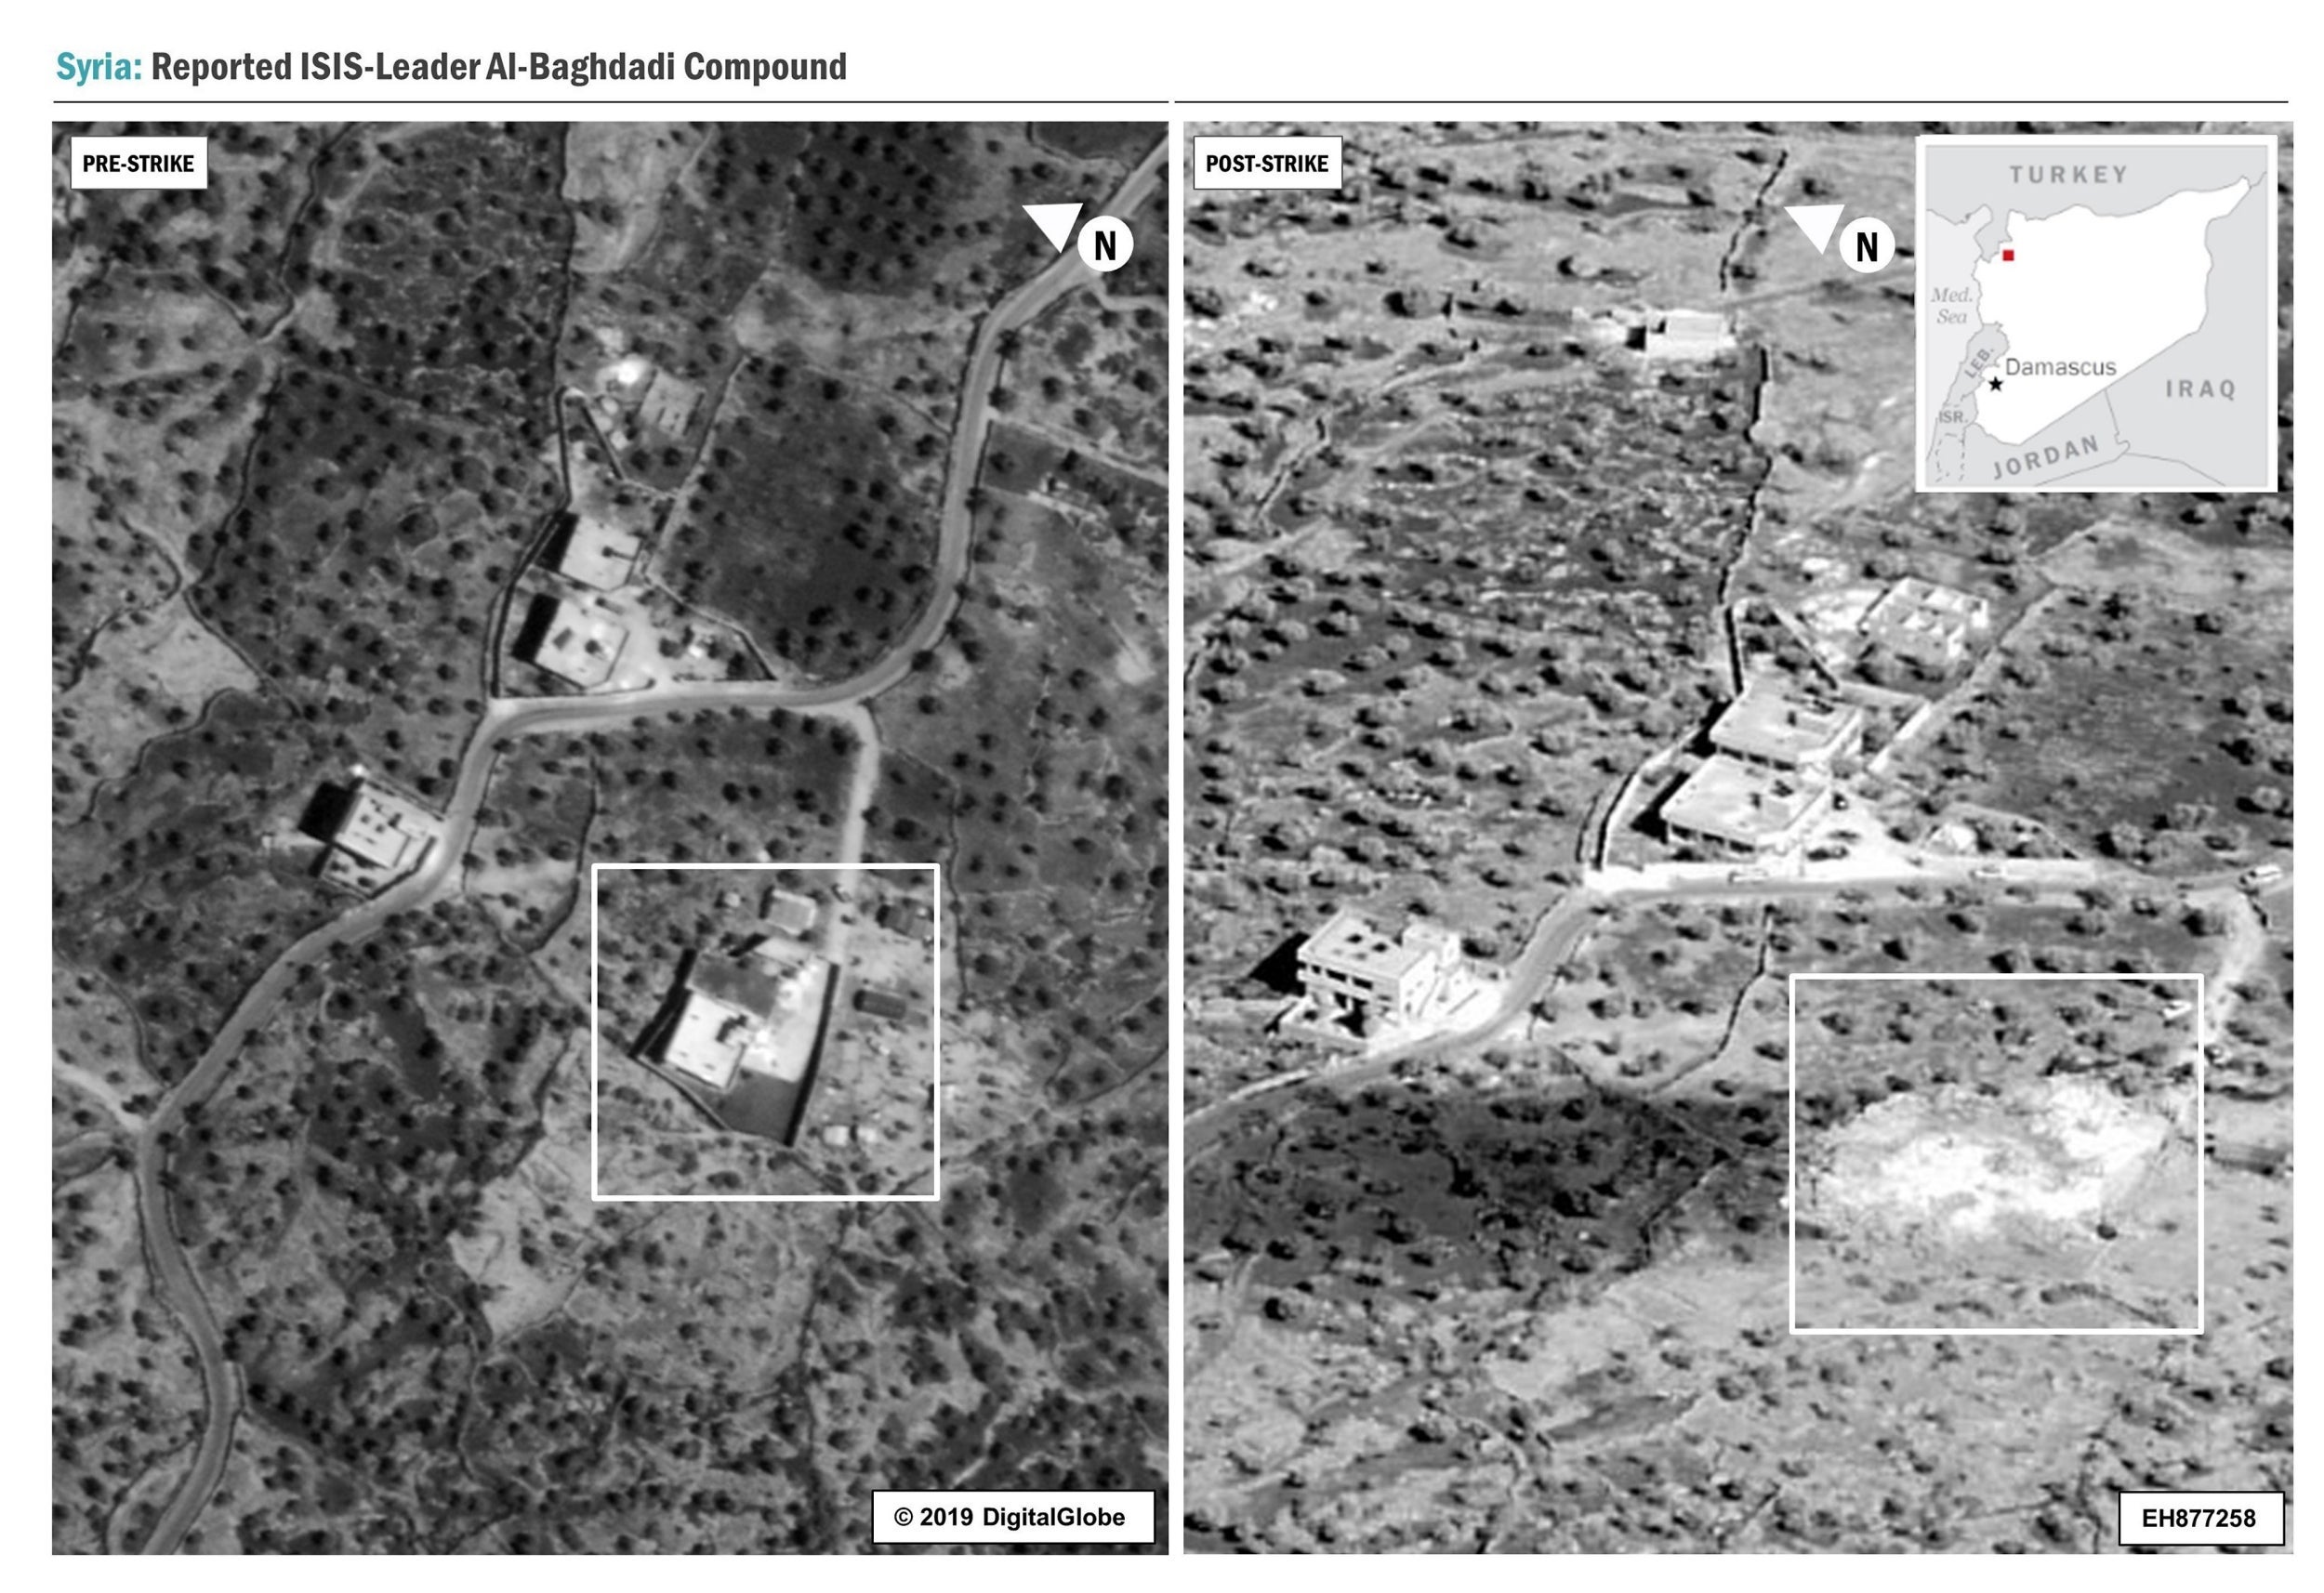 An image released by the US defence department showing the compound where Isis leader Abu Bakr al-Baghdadi was killed in a raid by US special forces, before (left) and after the attack